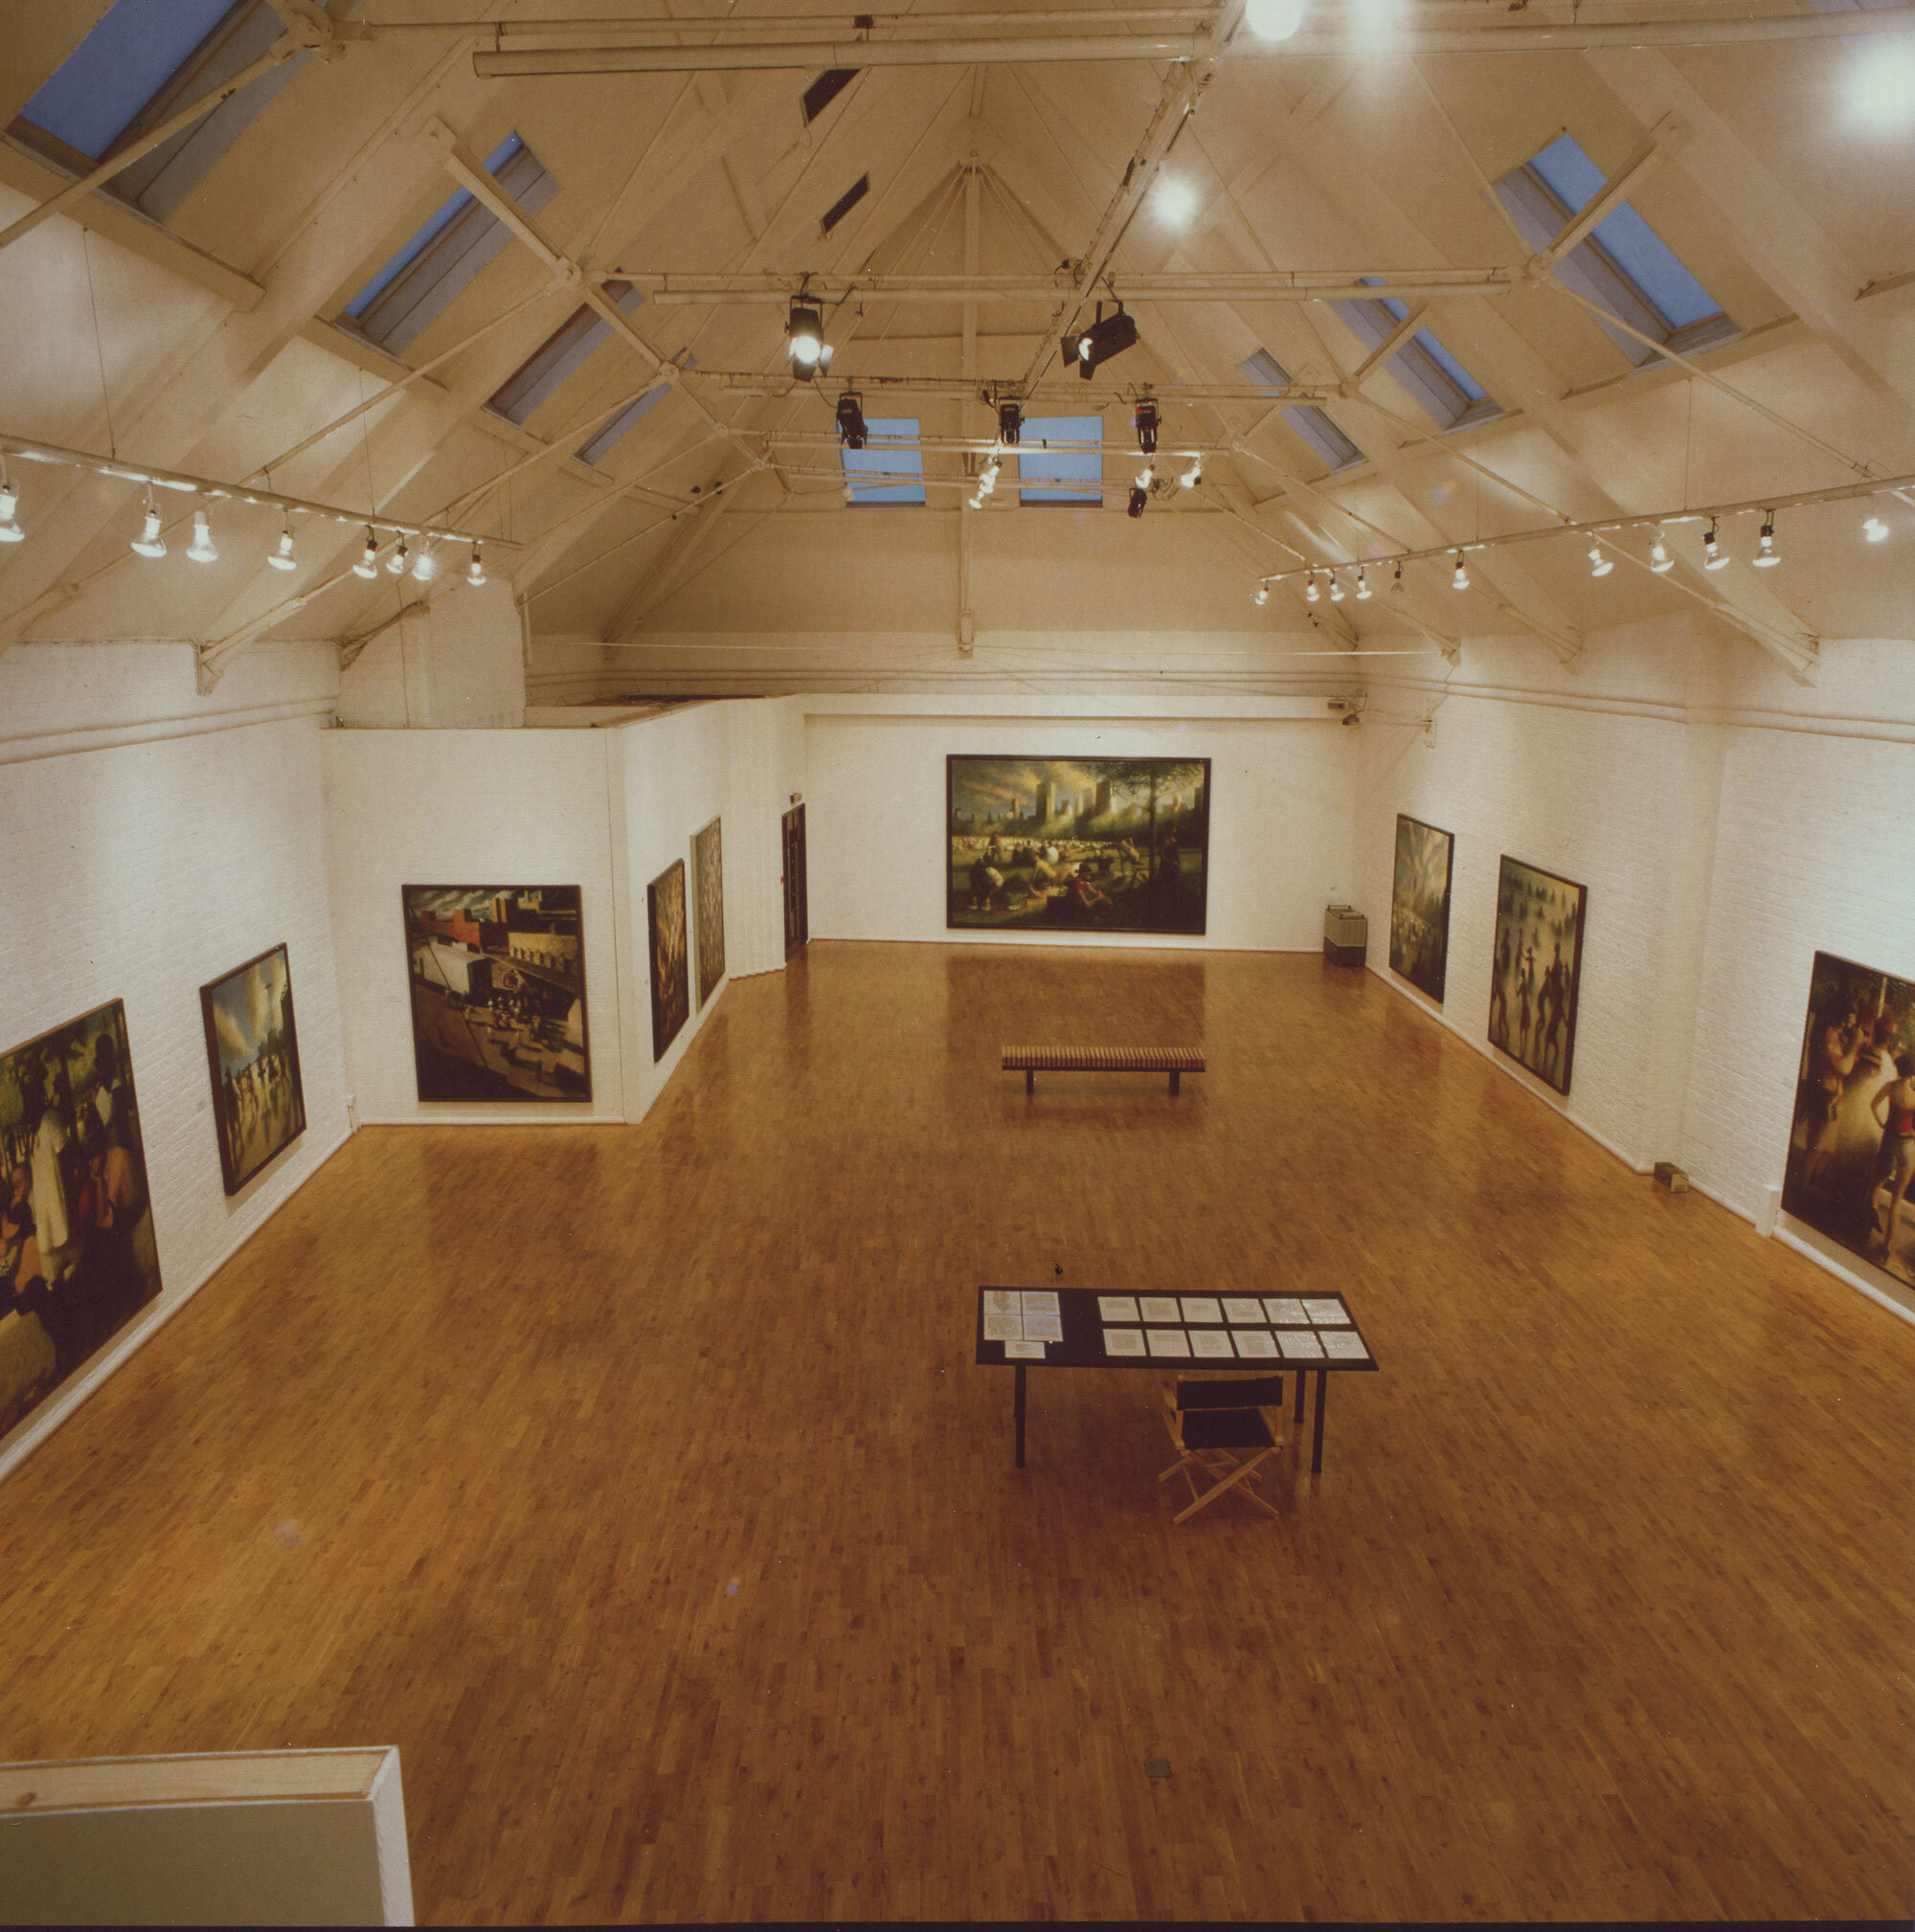  Museum of Modern Art, Oxford, Survey of New York Paintings, 1992 